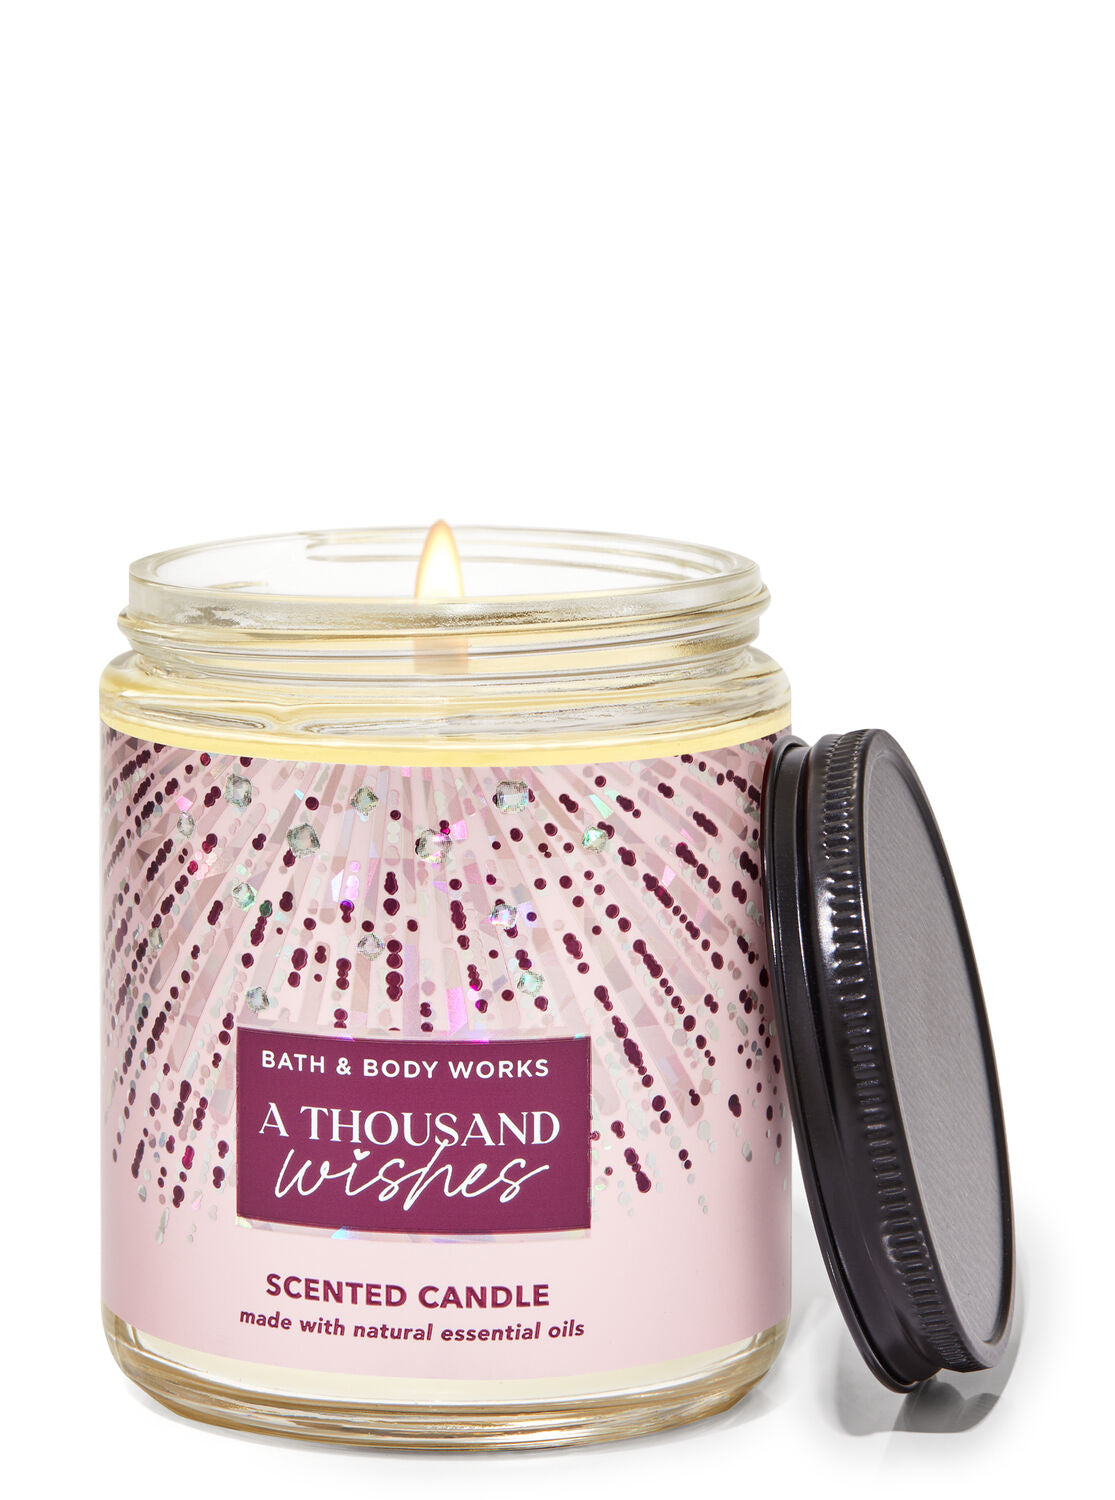 A Thousand Wishes candle - Bath & Body Works